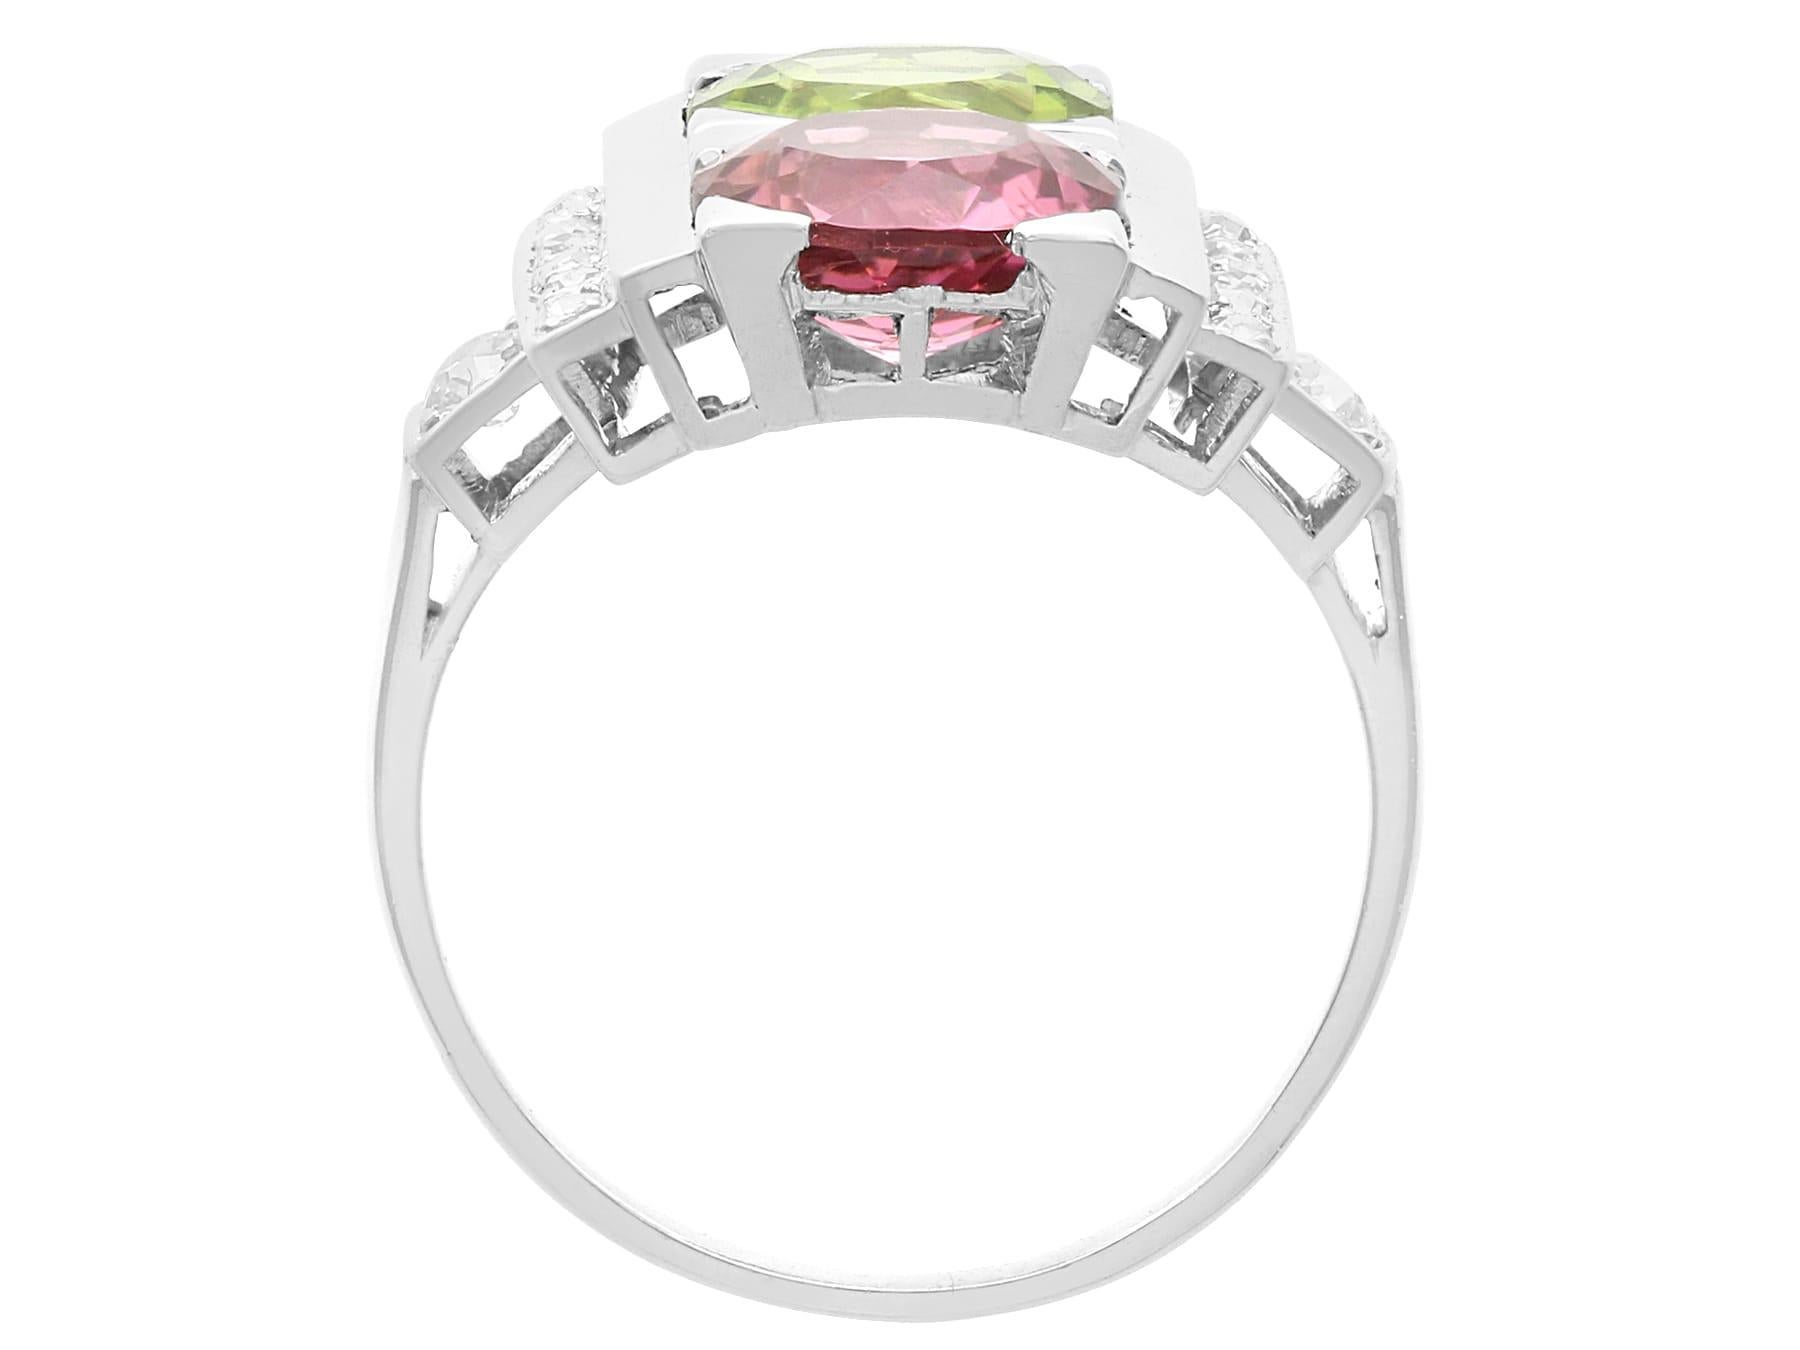 1930s 1.76 Carat Pink Tourmaline 1.70 Carat Peridot and Diamond Platinum Ring  In Excellent Condition For Sale In Jesmond, Newcastle Upon Tyne